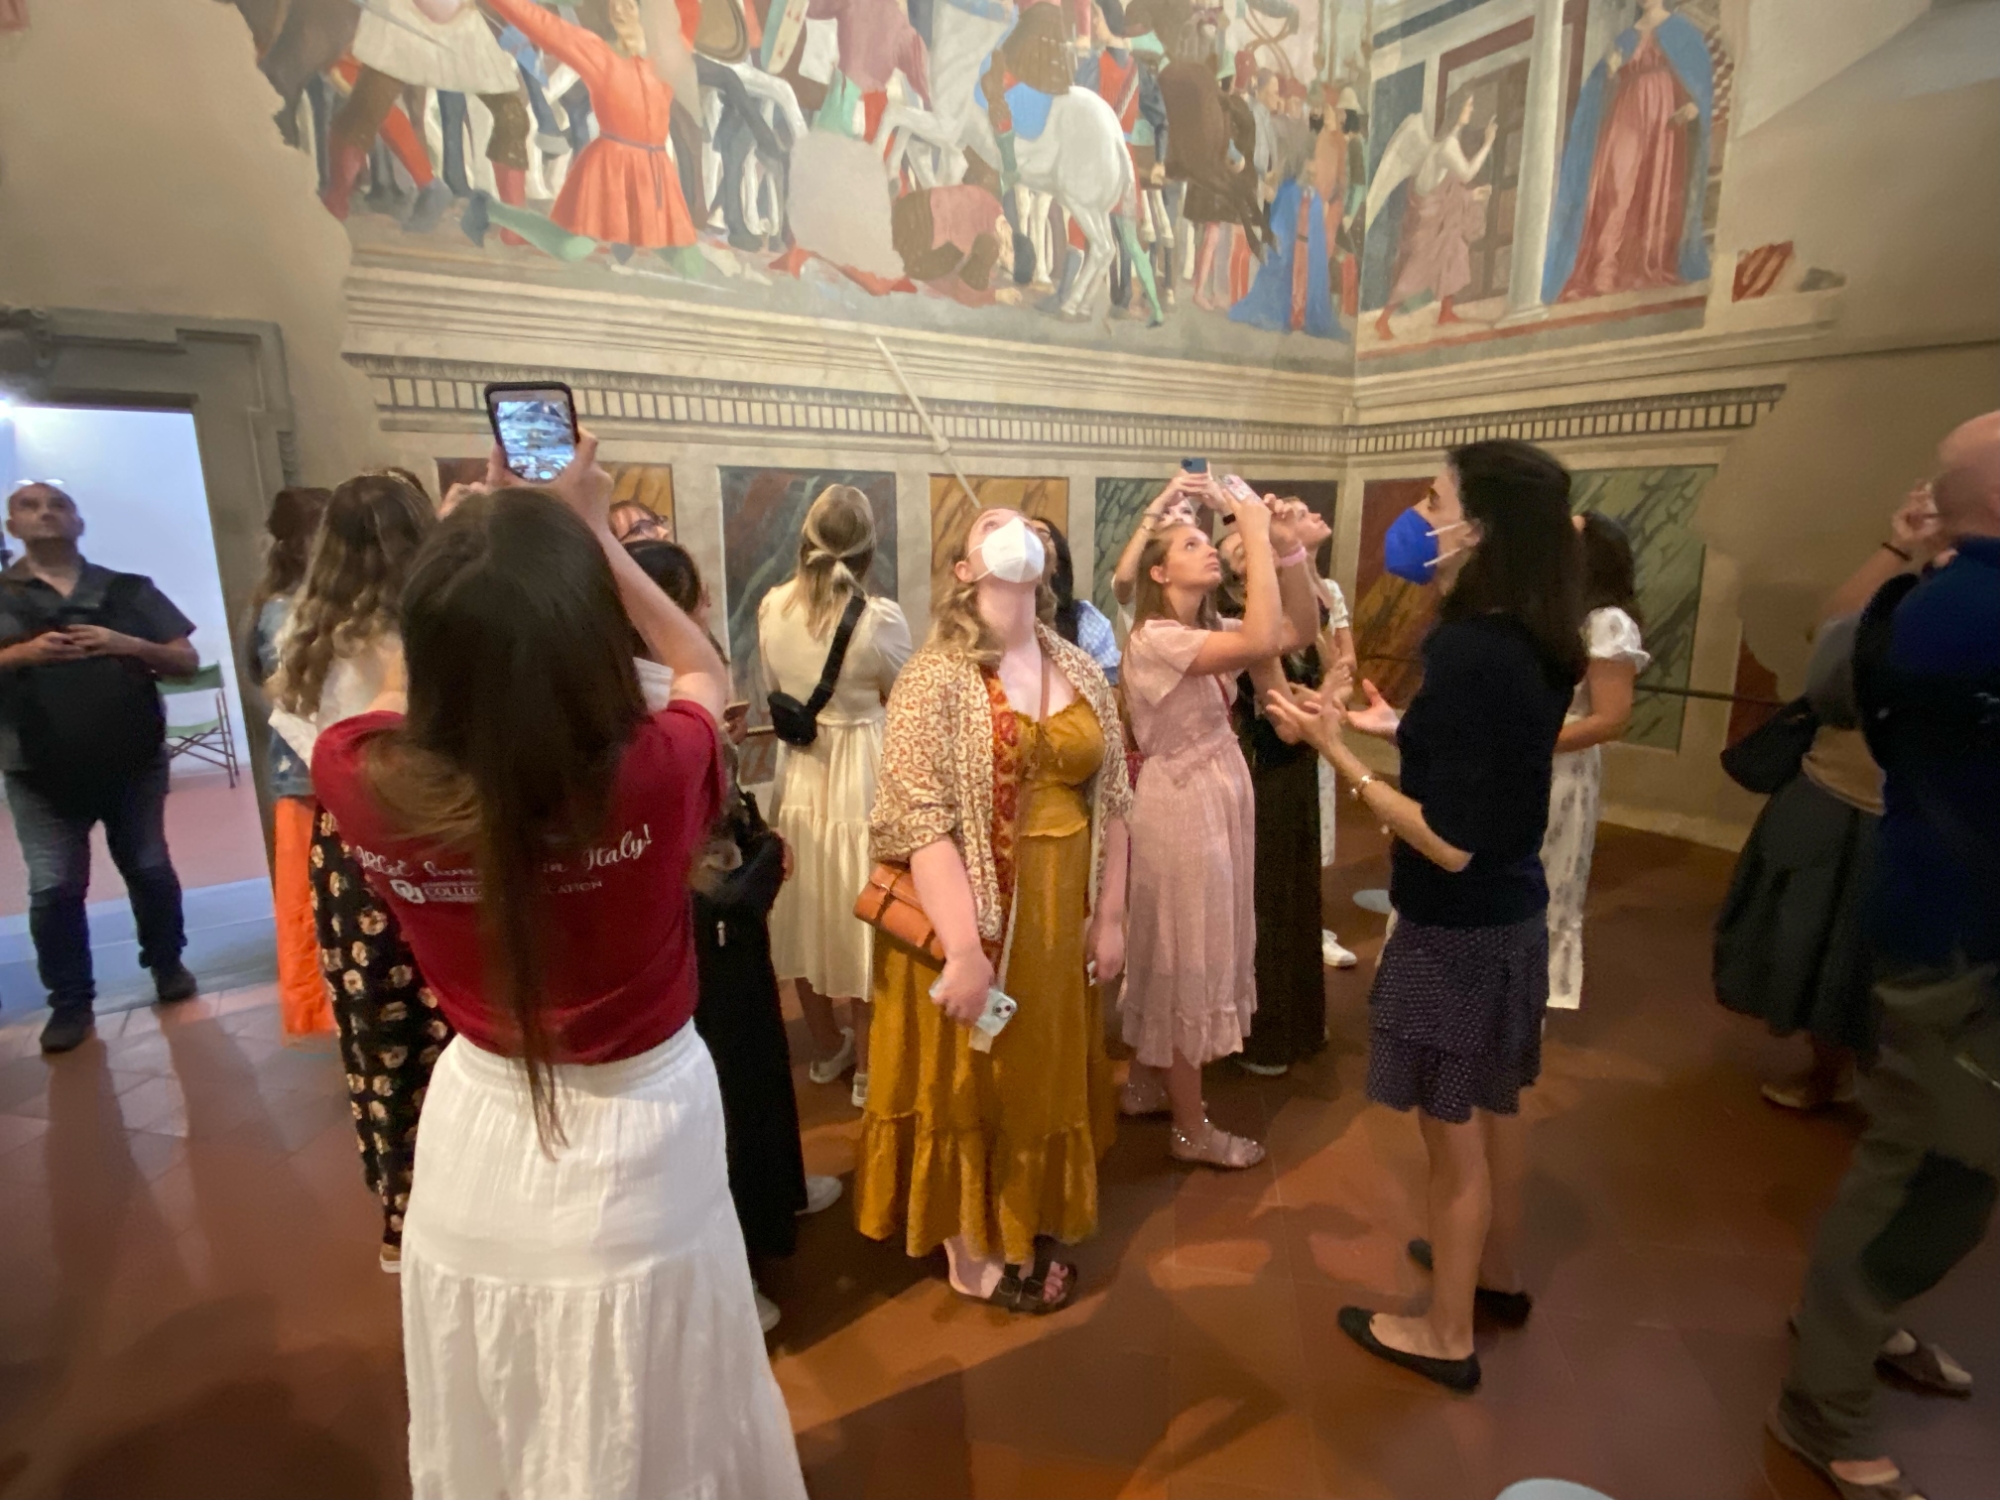 Students looking at frescoes